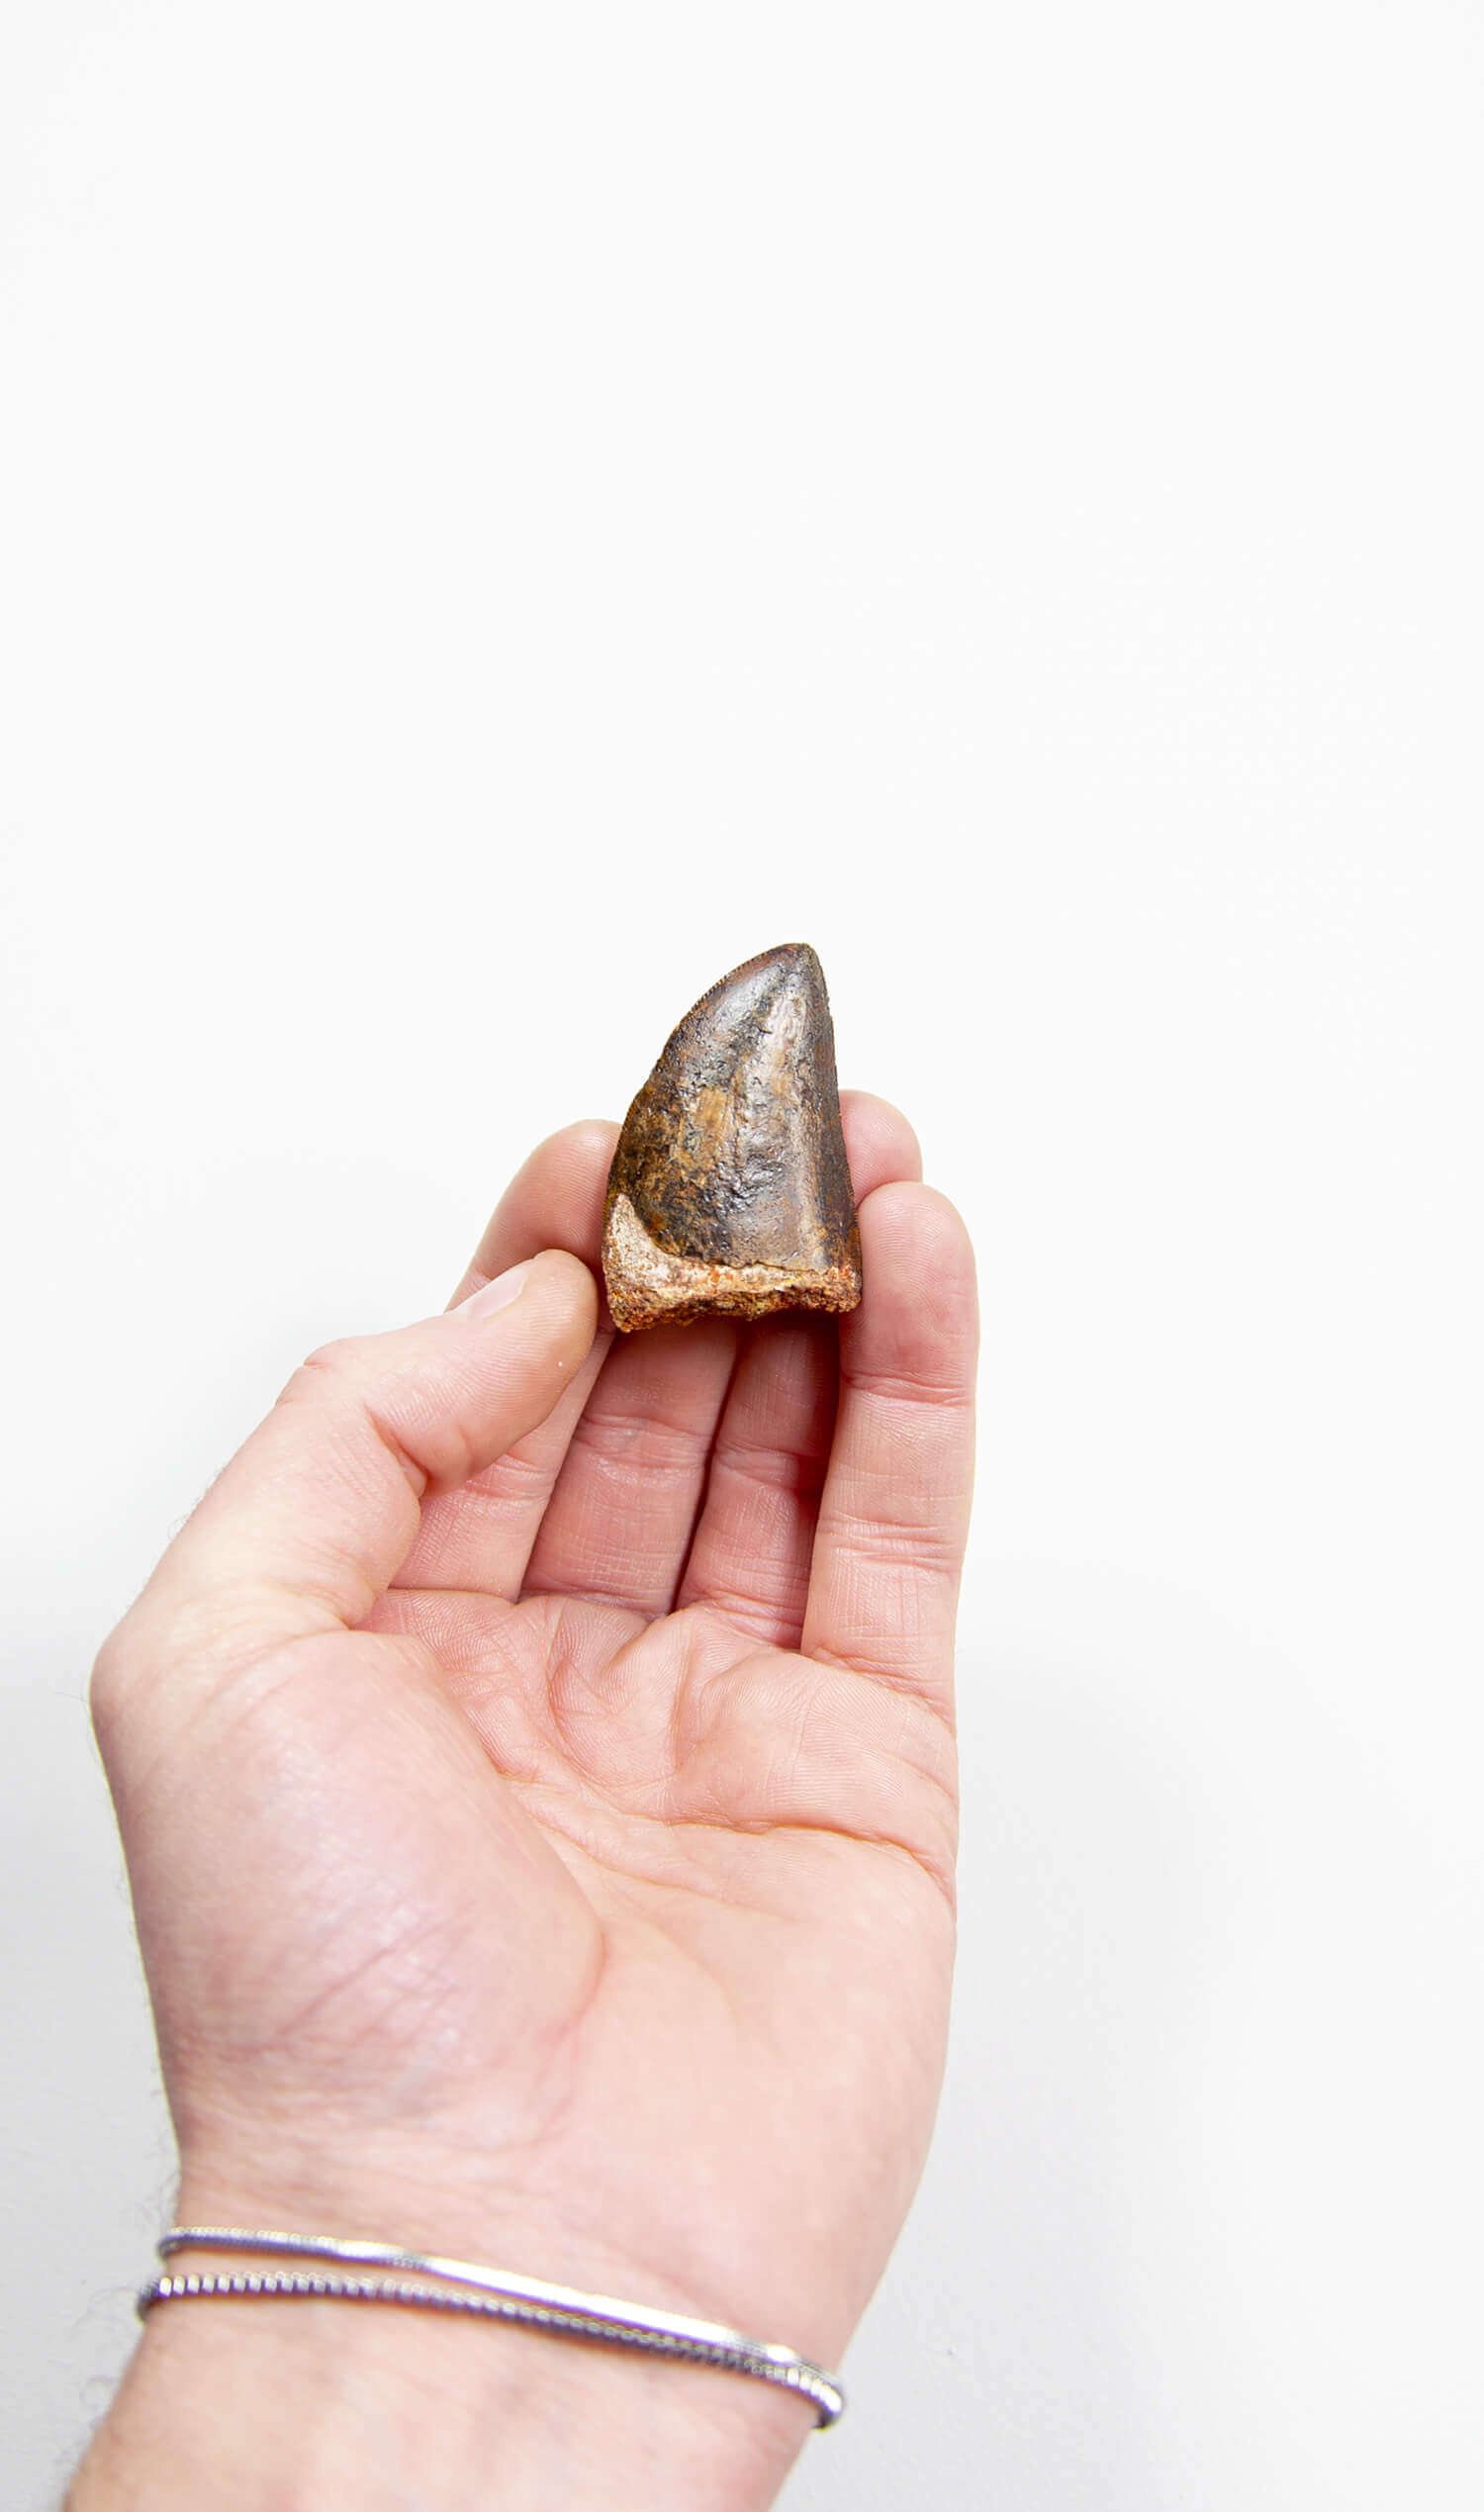 real fossil dinosaur carcharodontosaurus tooth for sale at the uk fossil store 34